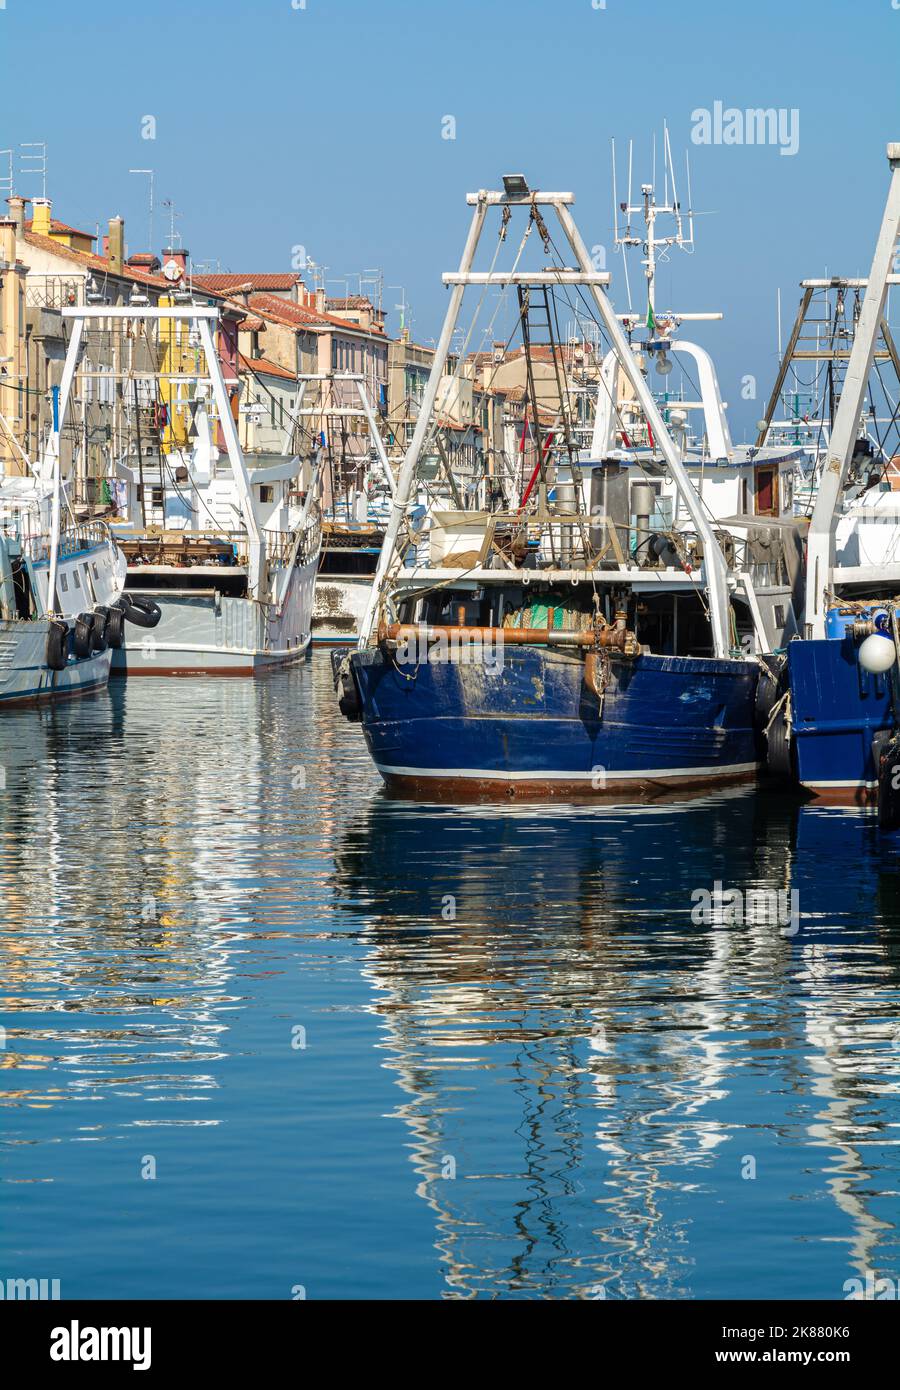 Big fishing boats moored in the port on the Adriatic sea at Chioggia city, Venetian lagoon, Venice province, northern Italy Stock Photo